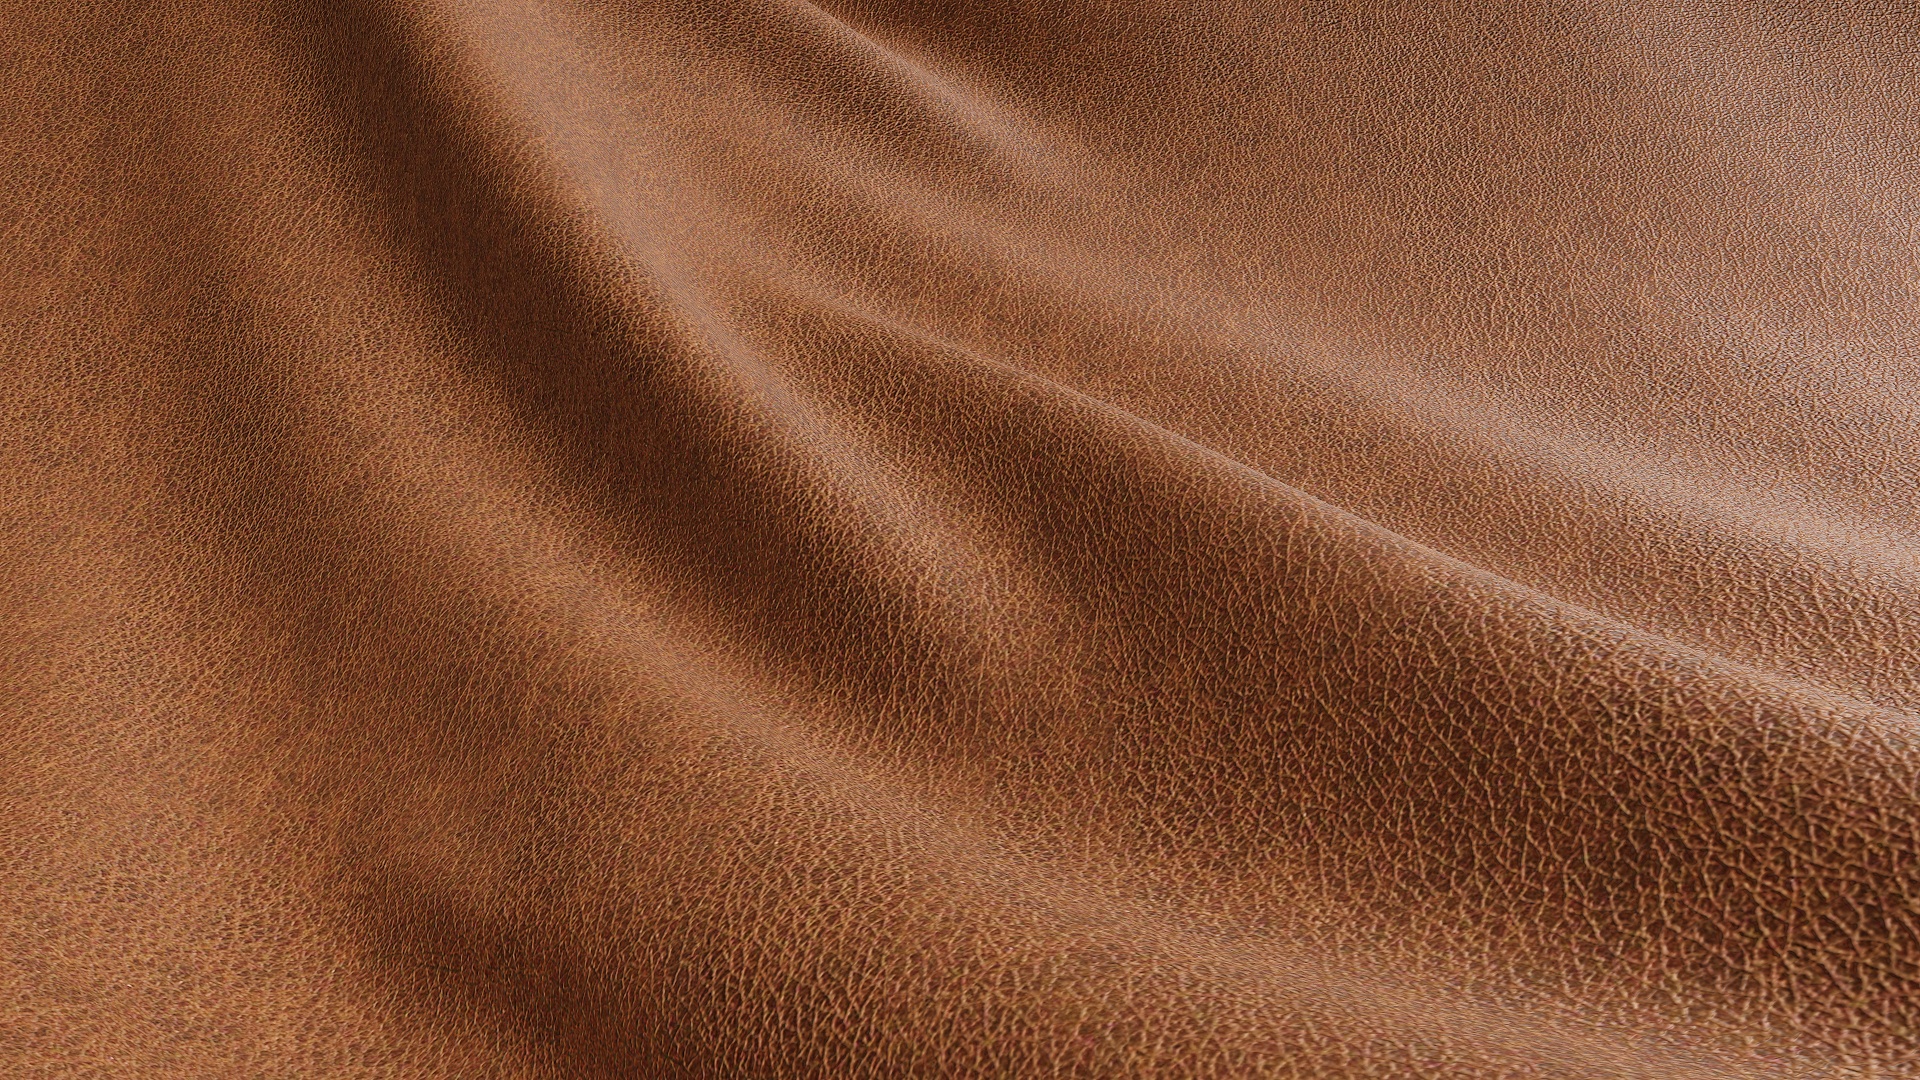 Soft Treated Leather - download free seamless texture and Substance PBR  material in high resolution